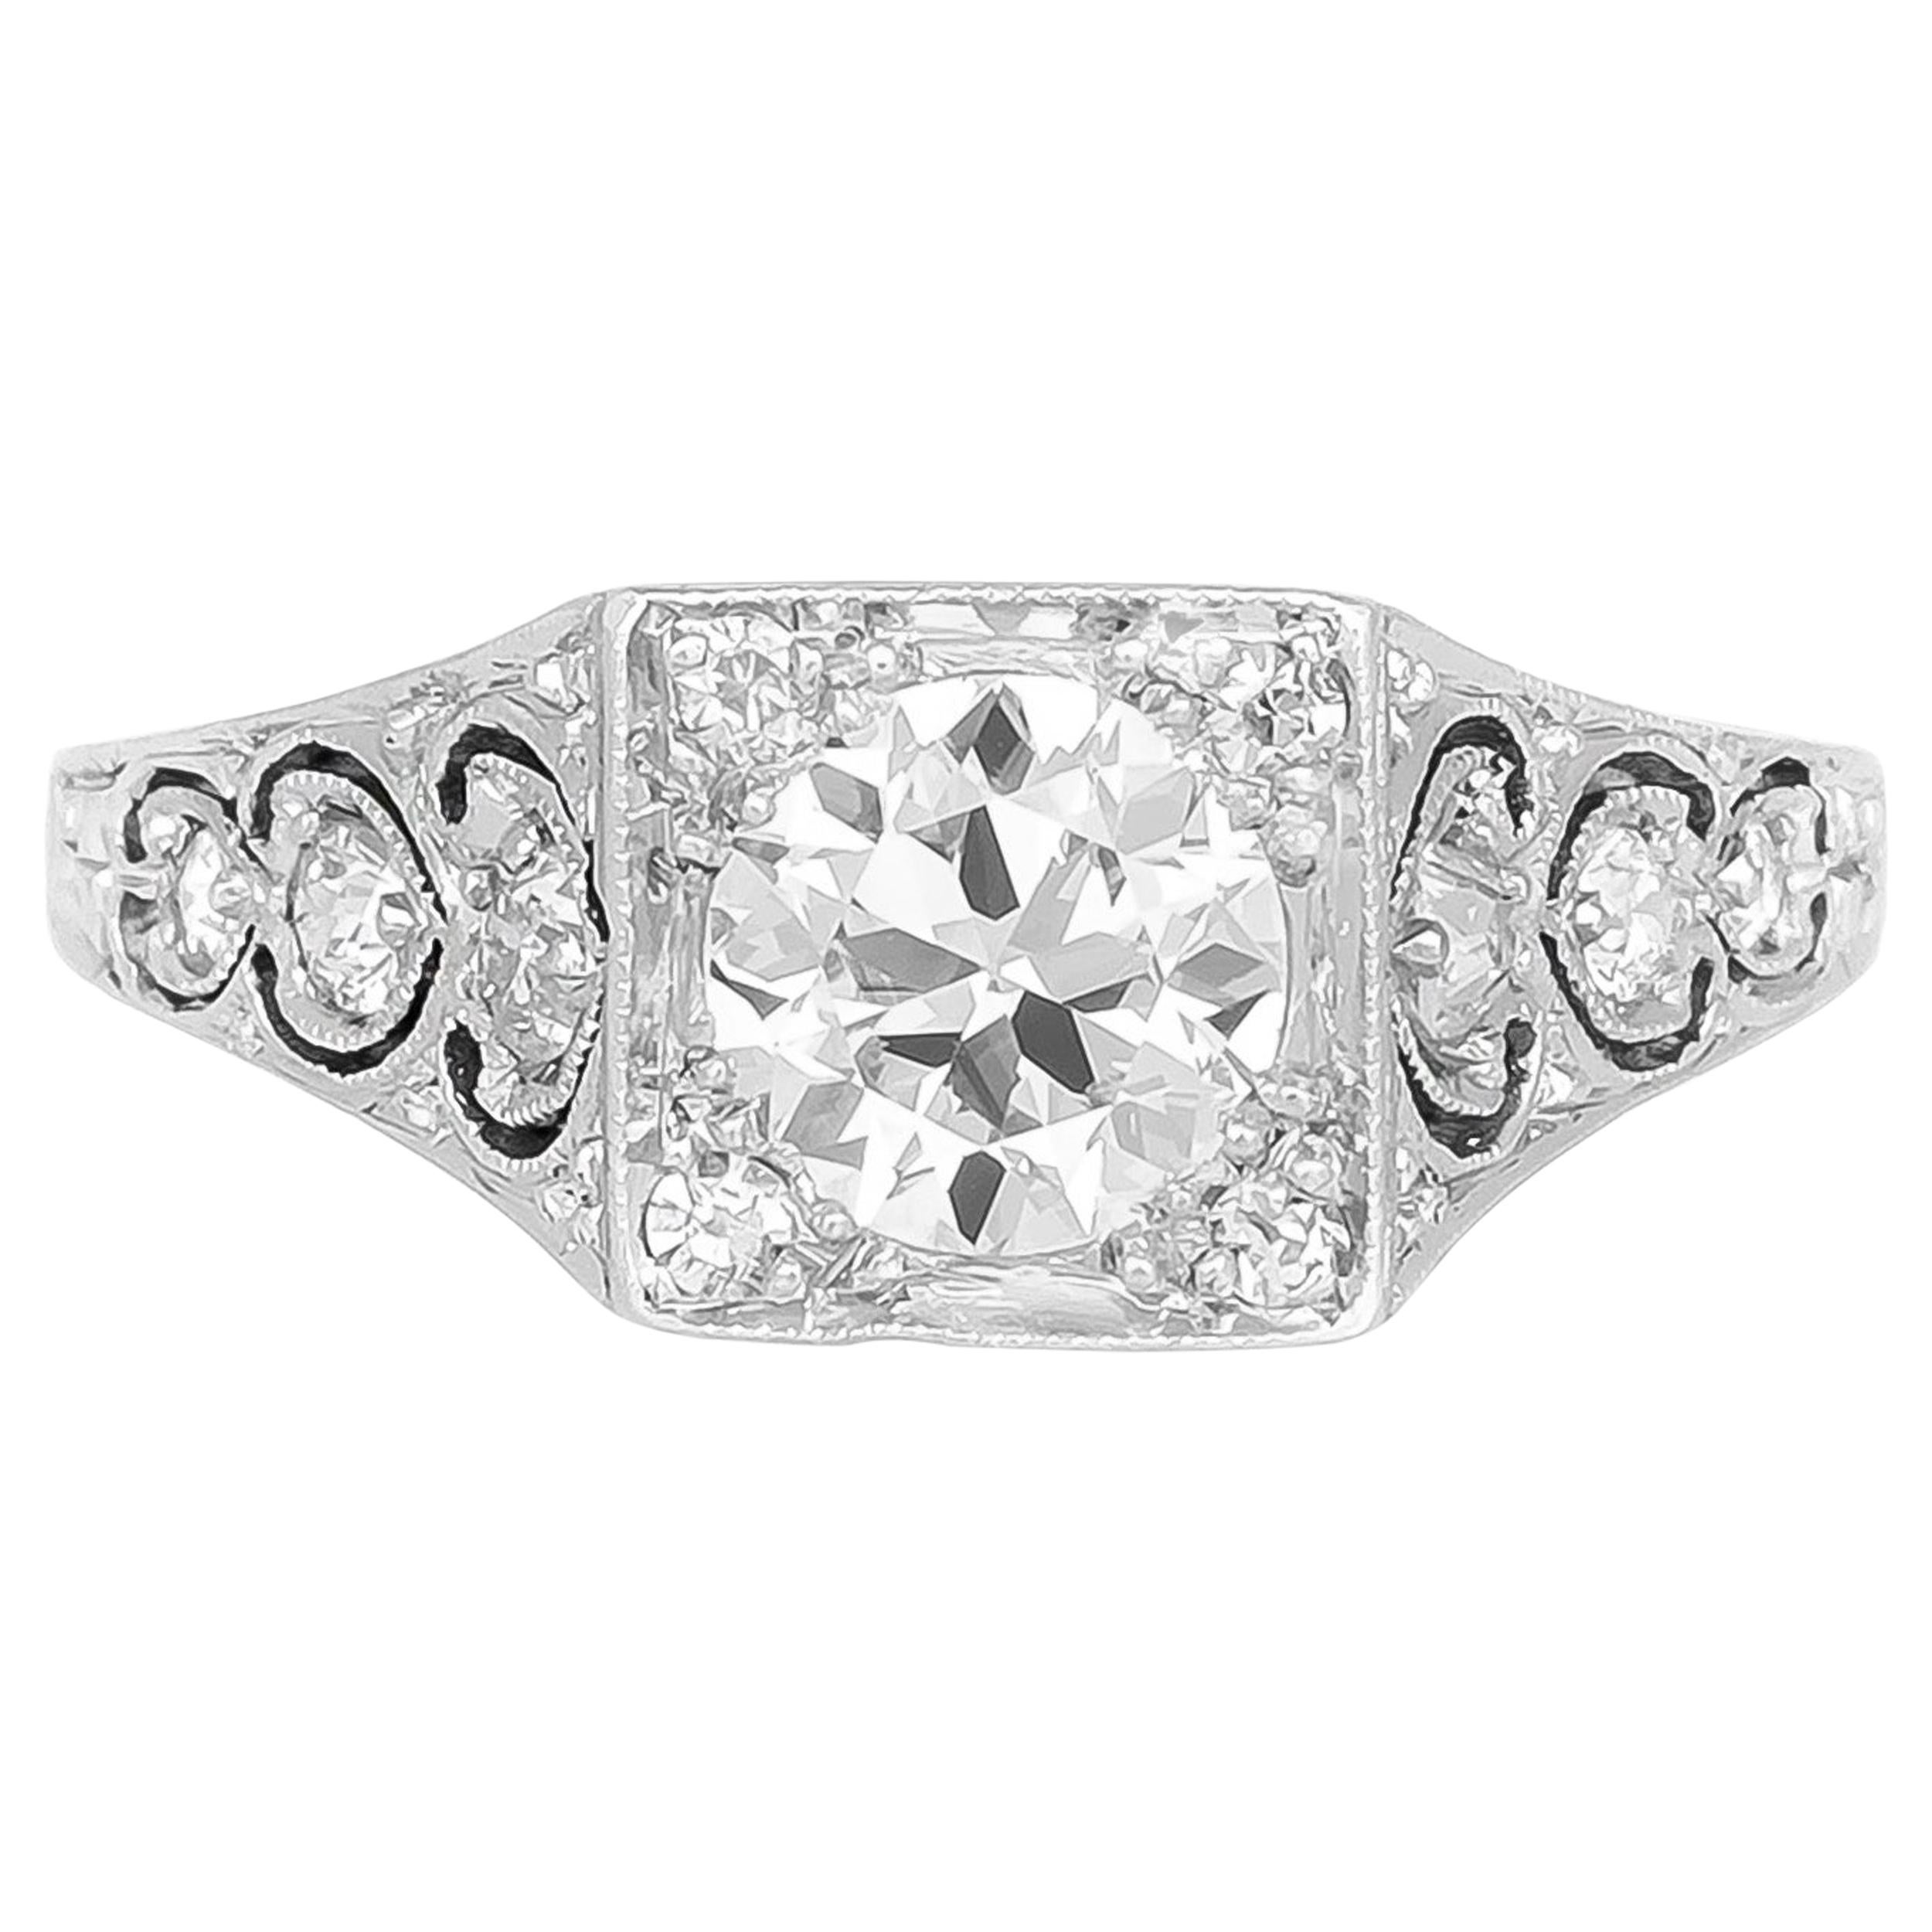 1920s-1930s Engagement Ring with Filigree and Beautiful Round Diamond